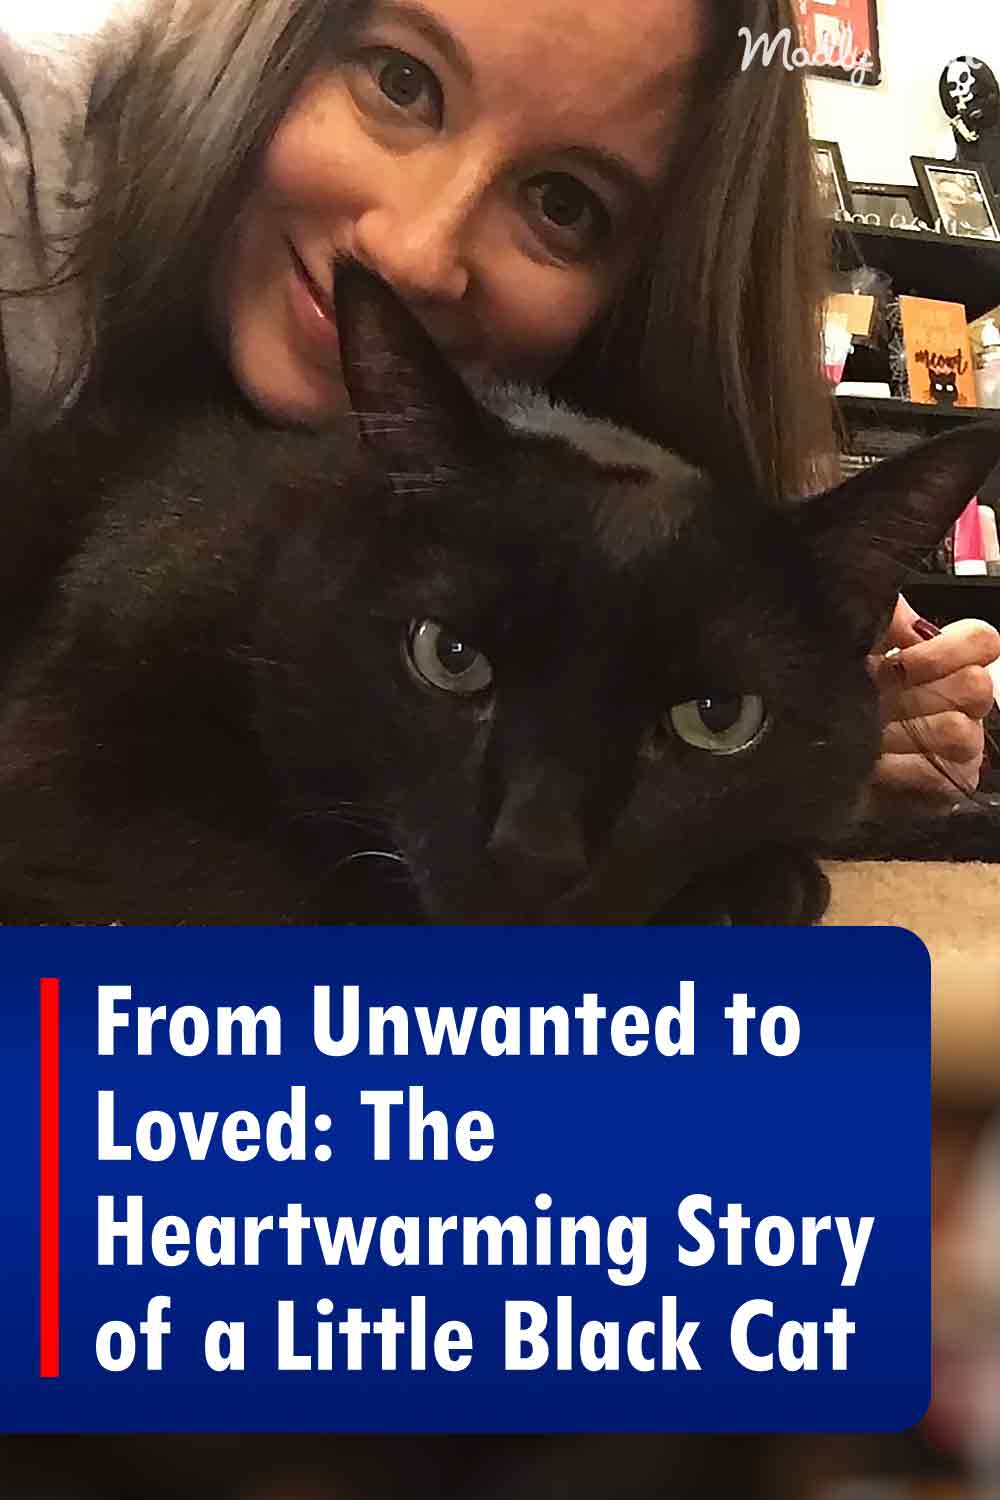 From Unwanted to Loved: The Heartwarming Story of a Little Black Cat